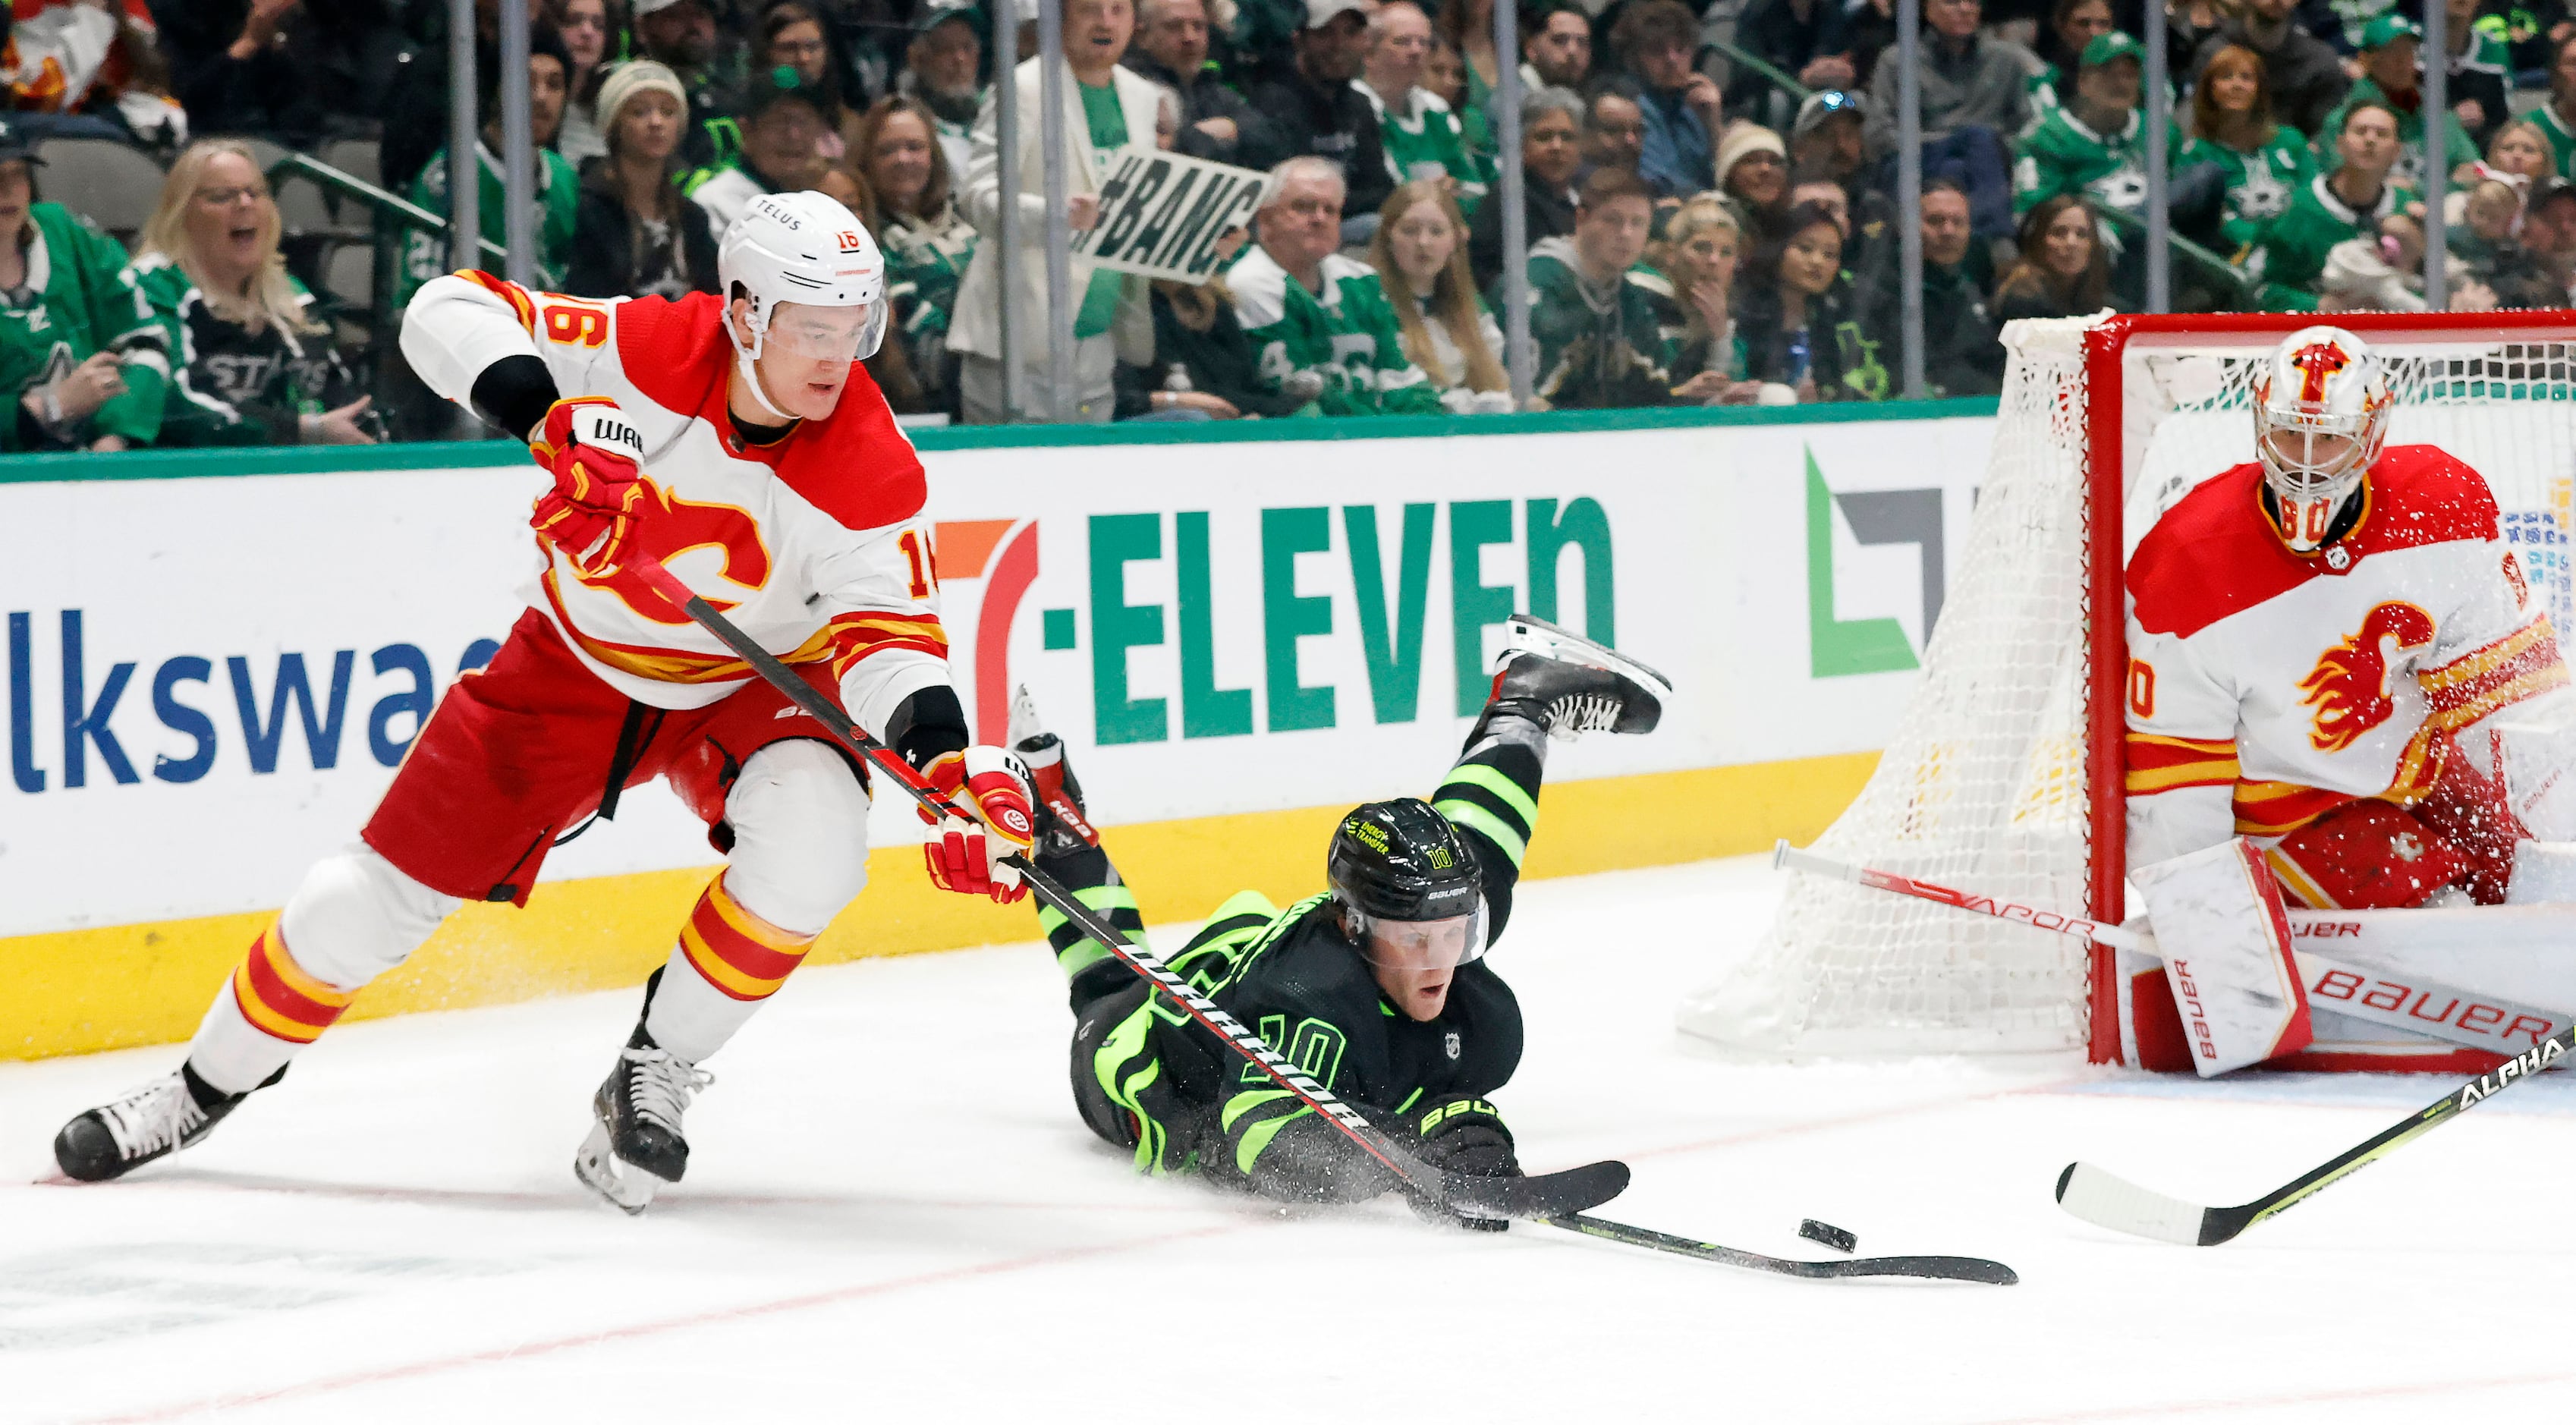 Flames score 4 goals in 2nd period, hold off Stars 6-5